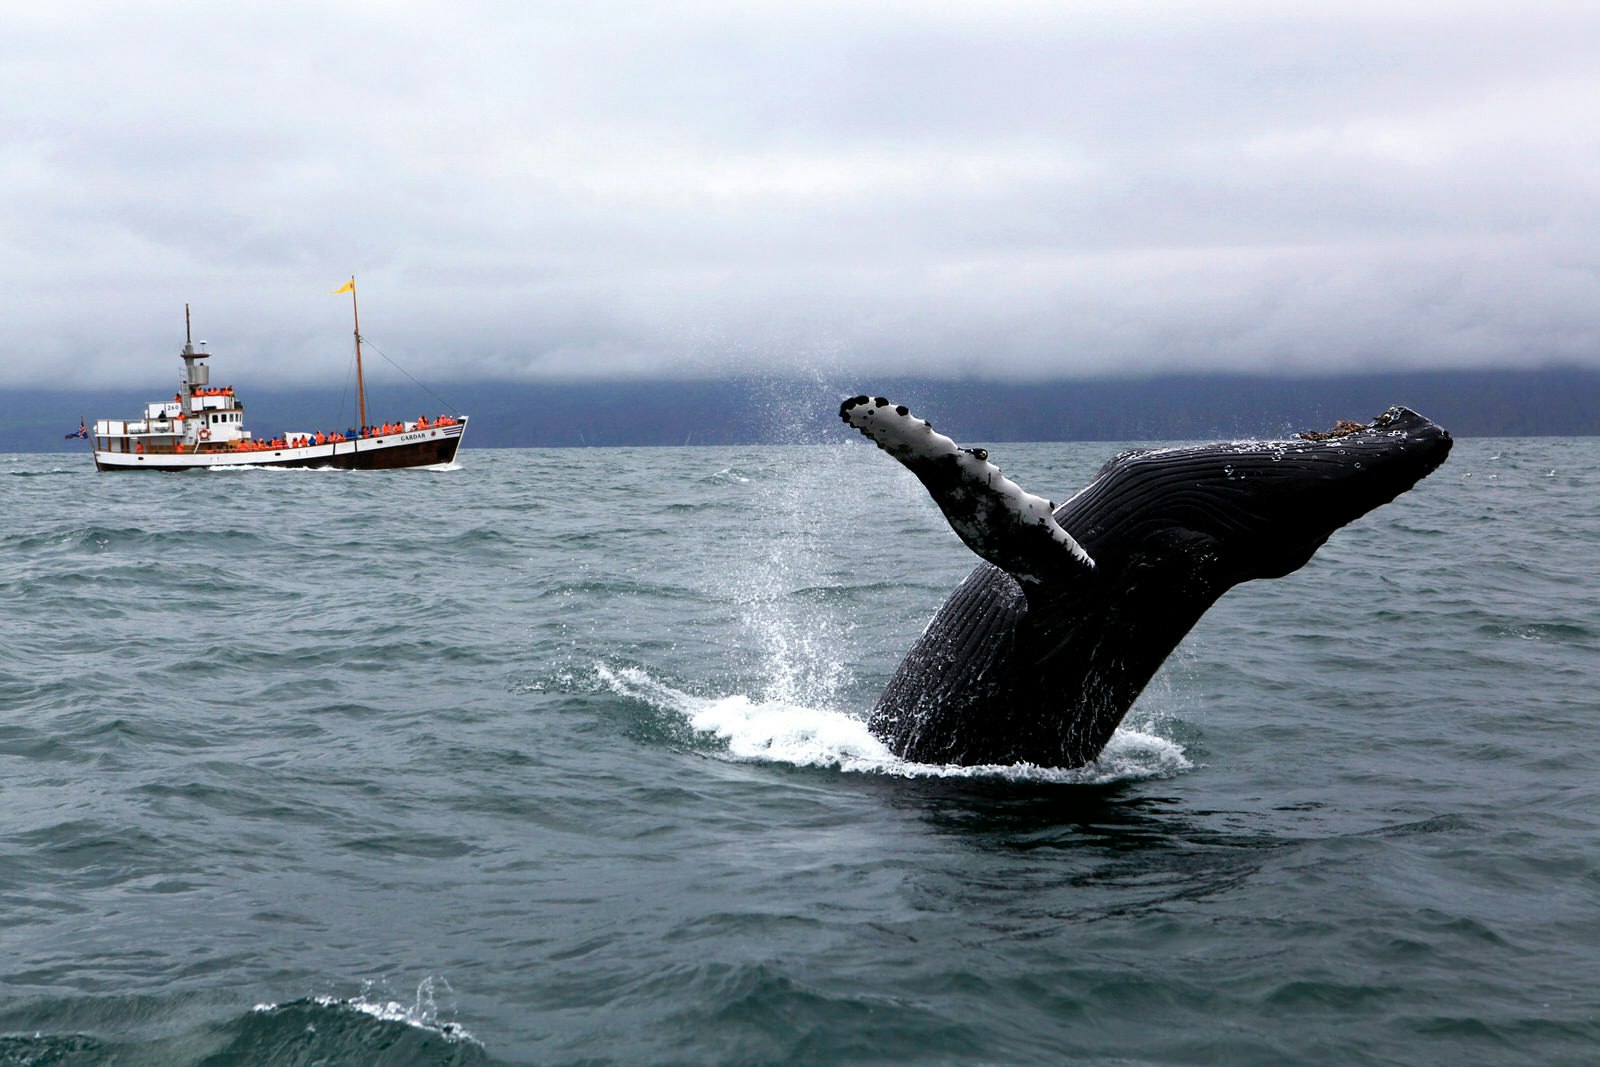 A humpback whale breaches in Skjálfandi Bay, North Iceland. This acrobatic species is one of the most commonly sighted in Iceland © Egill Bjarnason / Lonely Planet